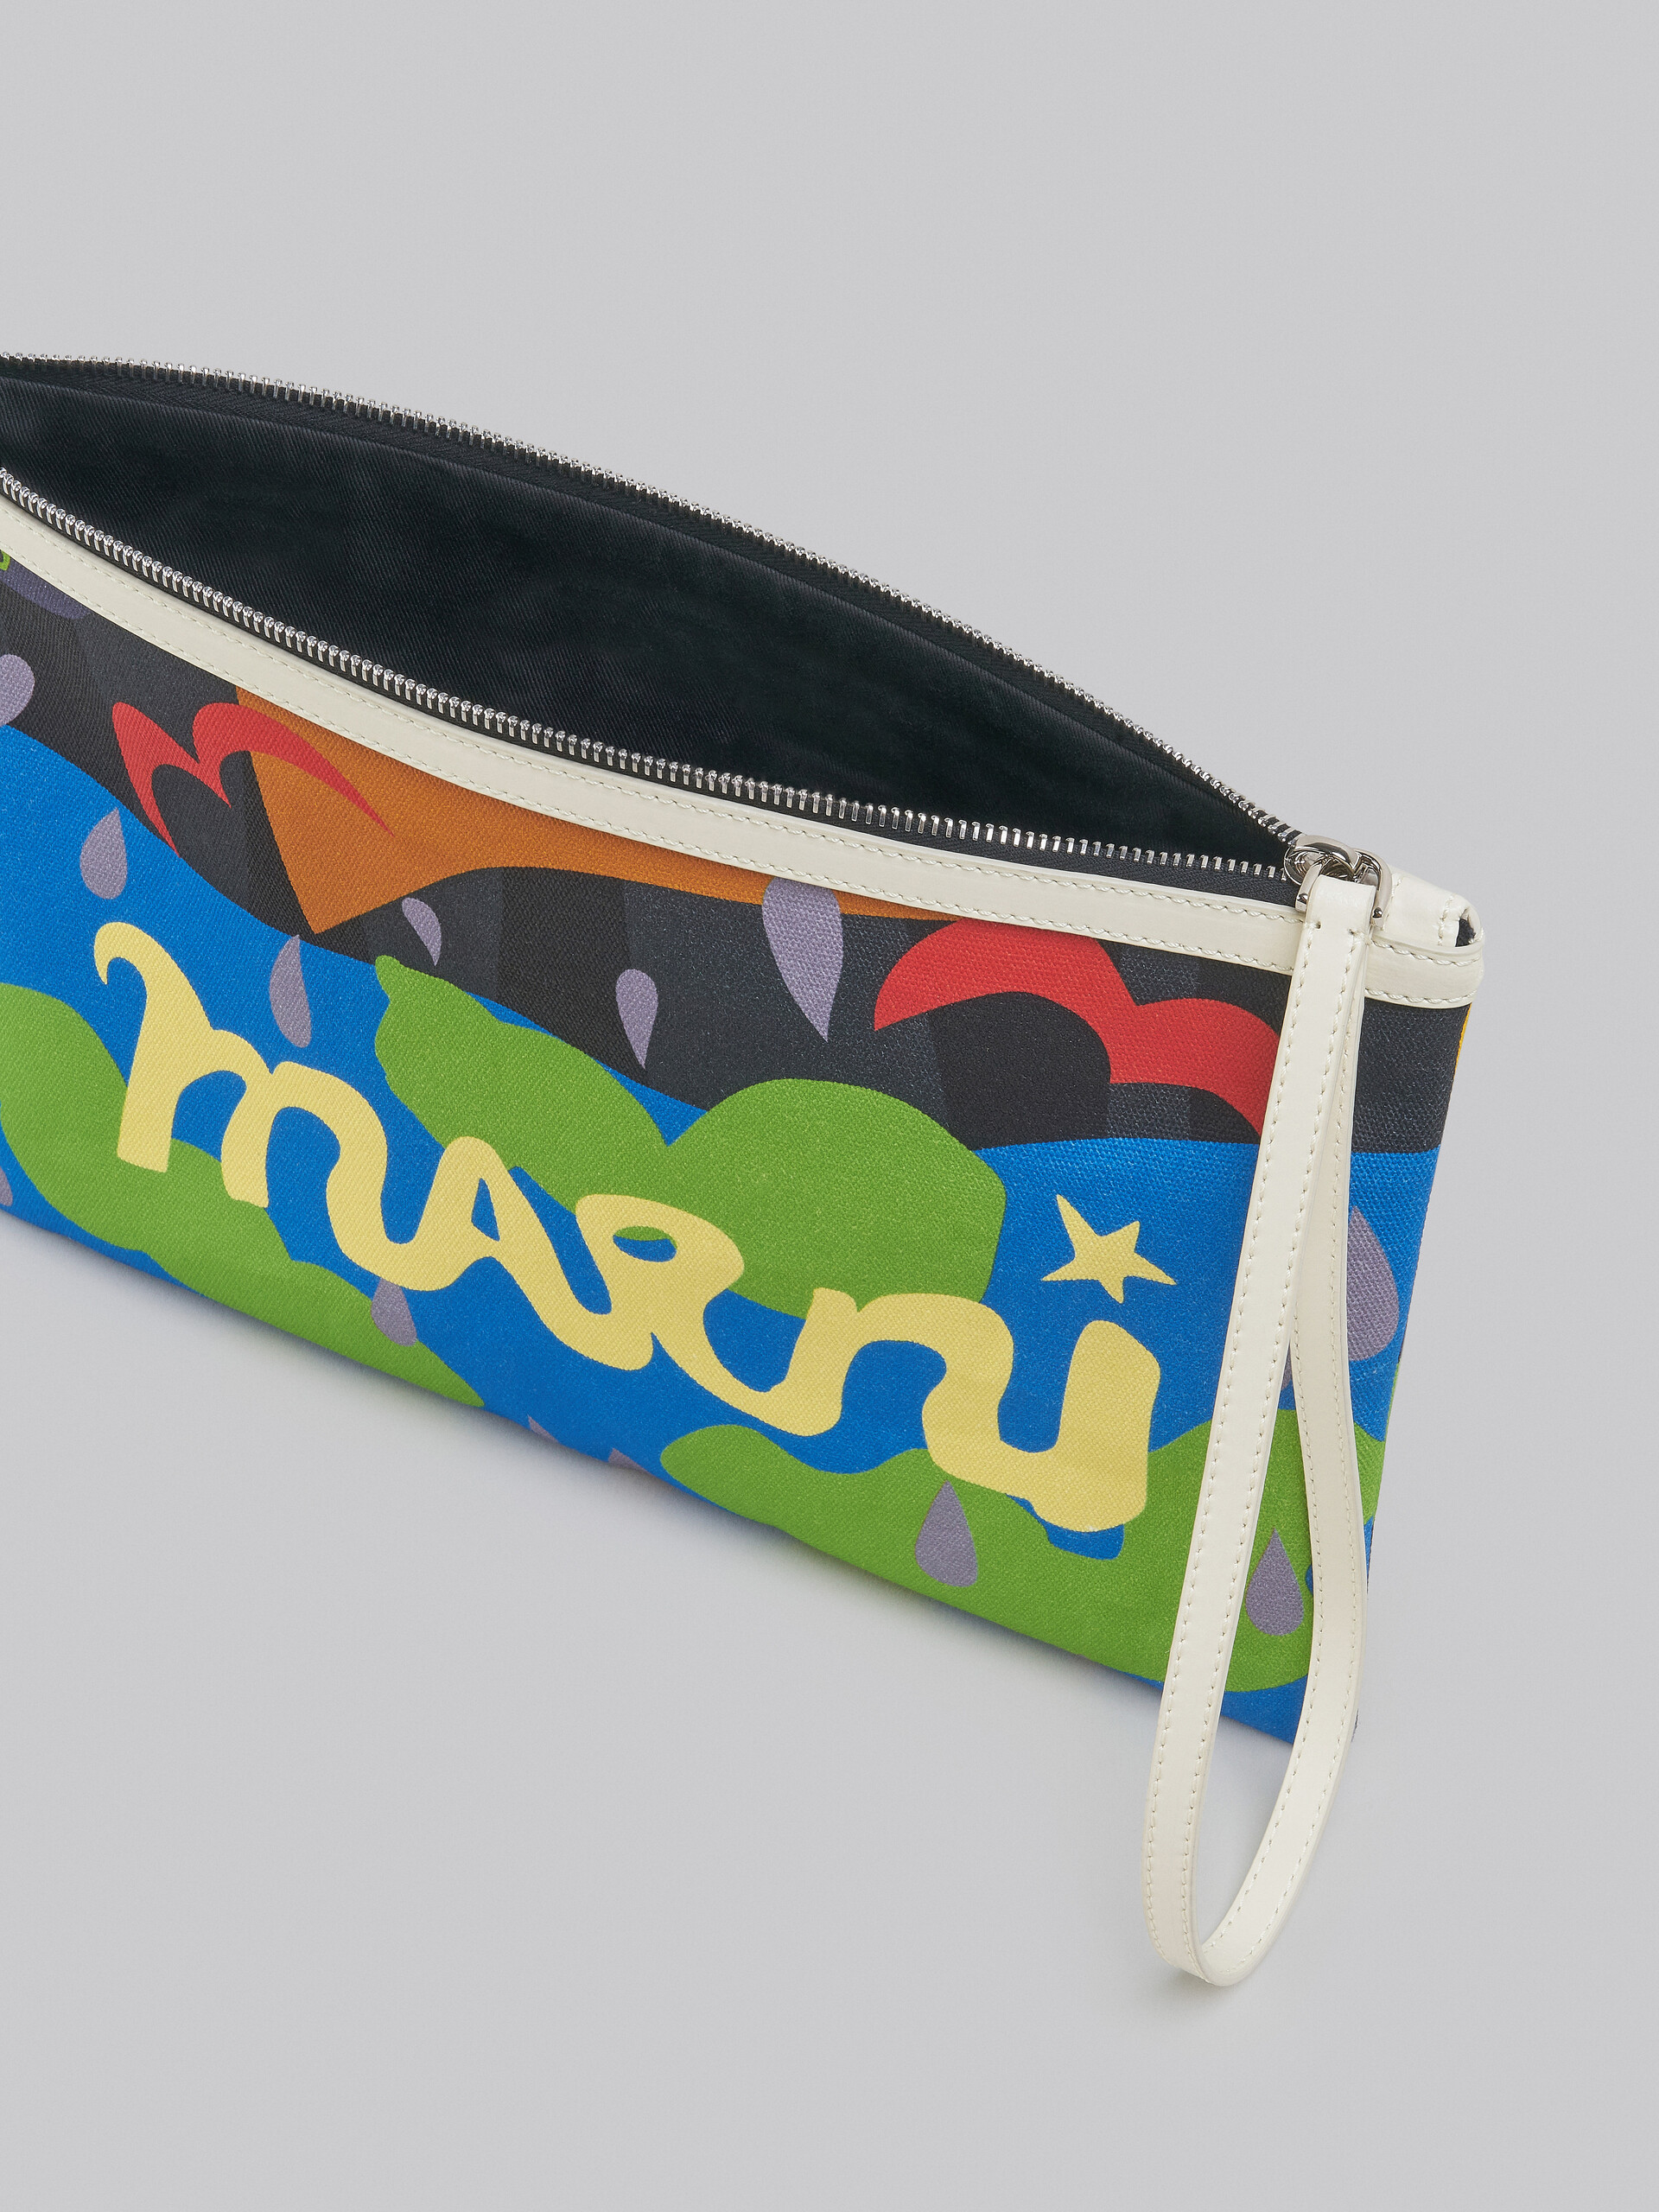 Marni x No Vacancy Inn - Pouch in coated canvas with print - Pochette - Image 4